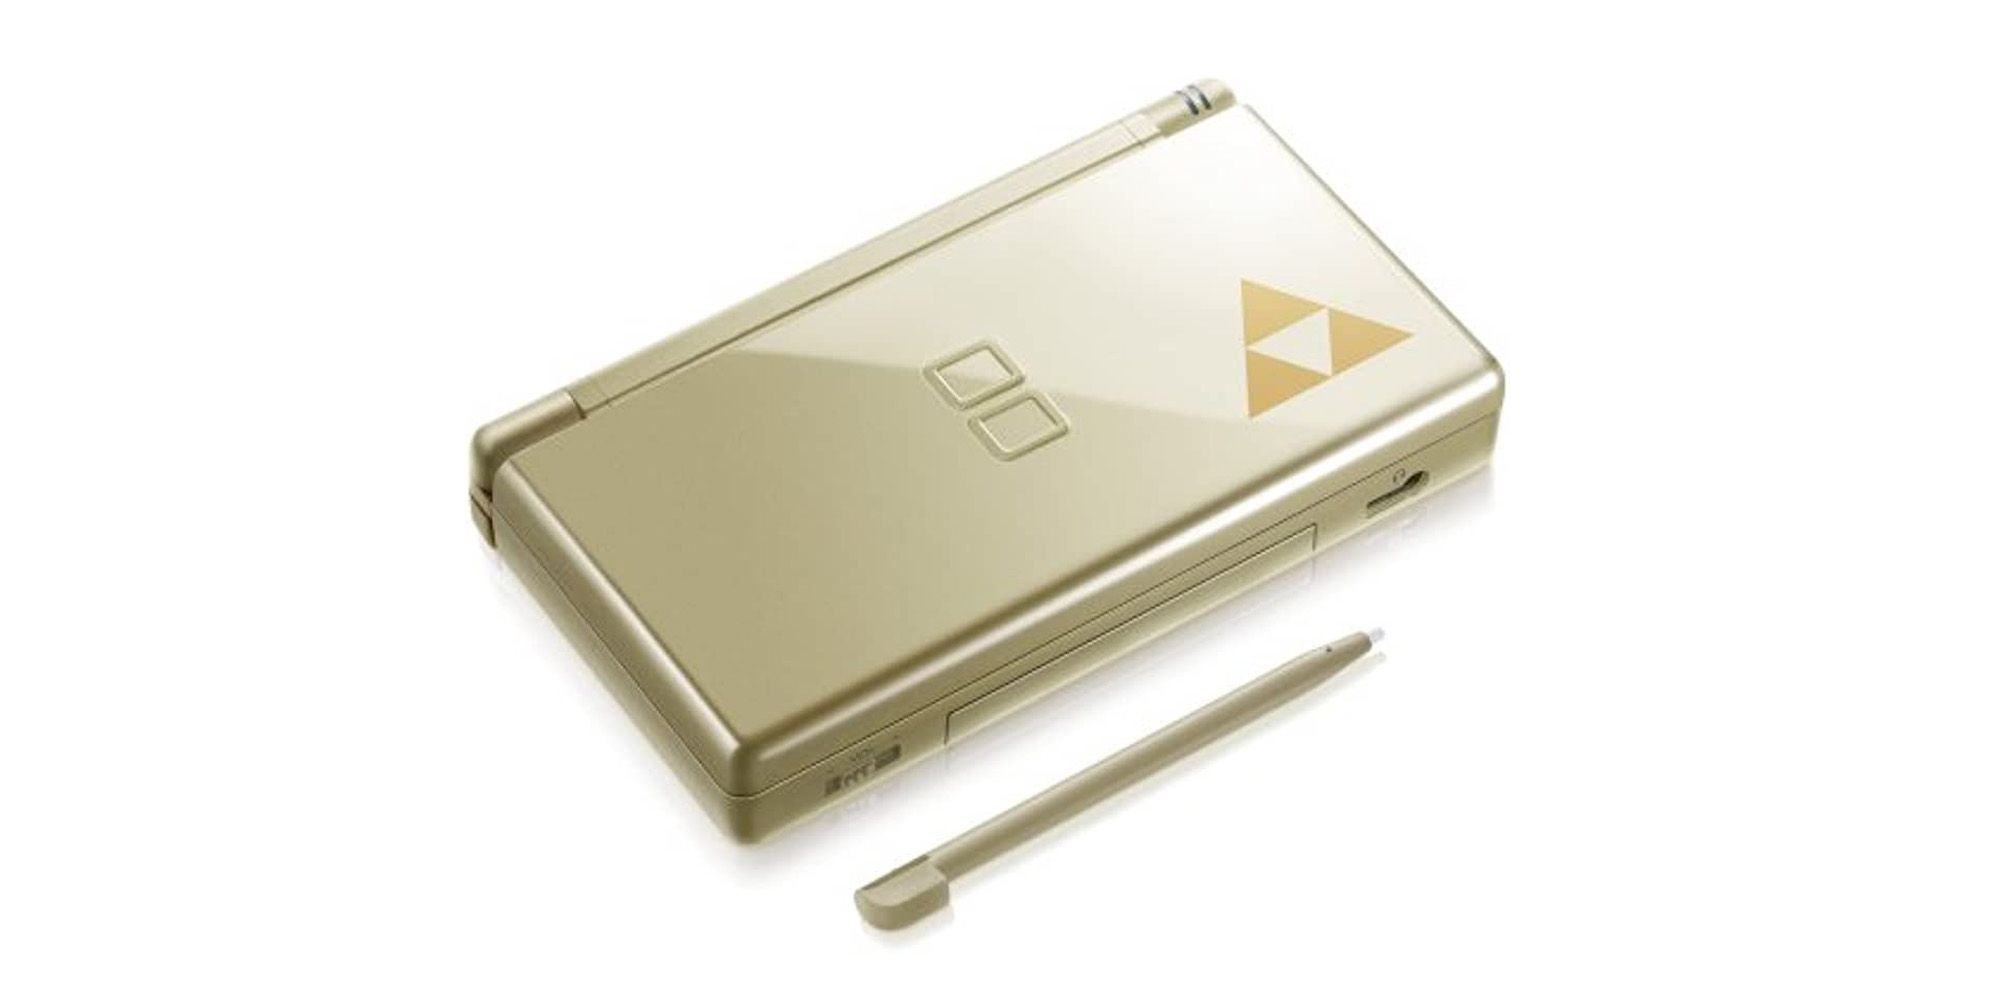 Gold DS Lite with Tri-Force at the bottom right of the panel.